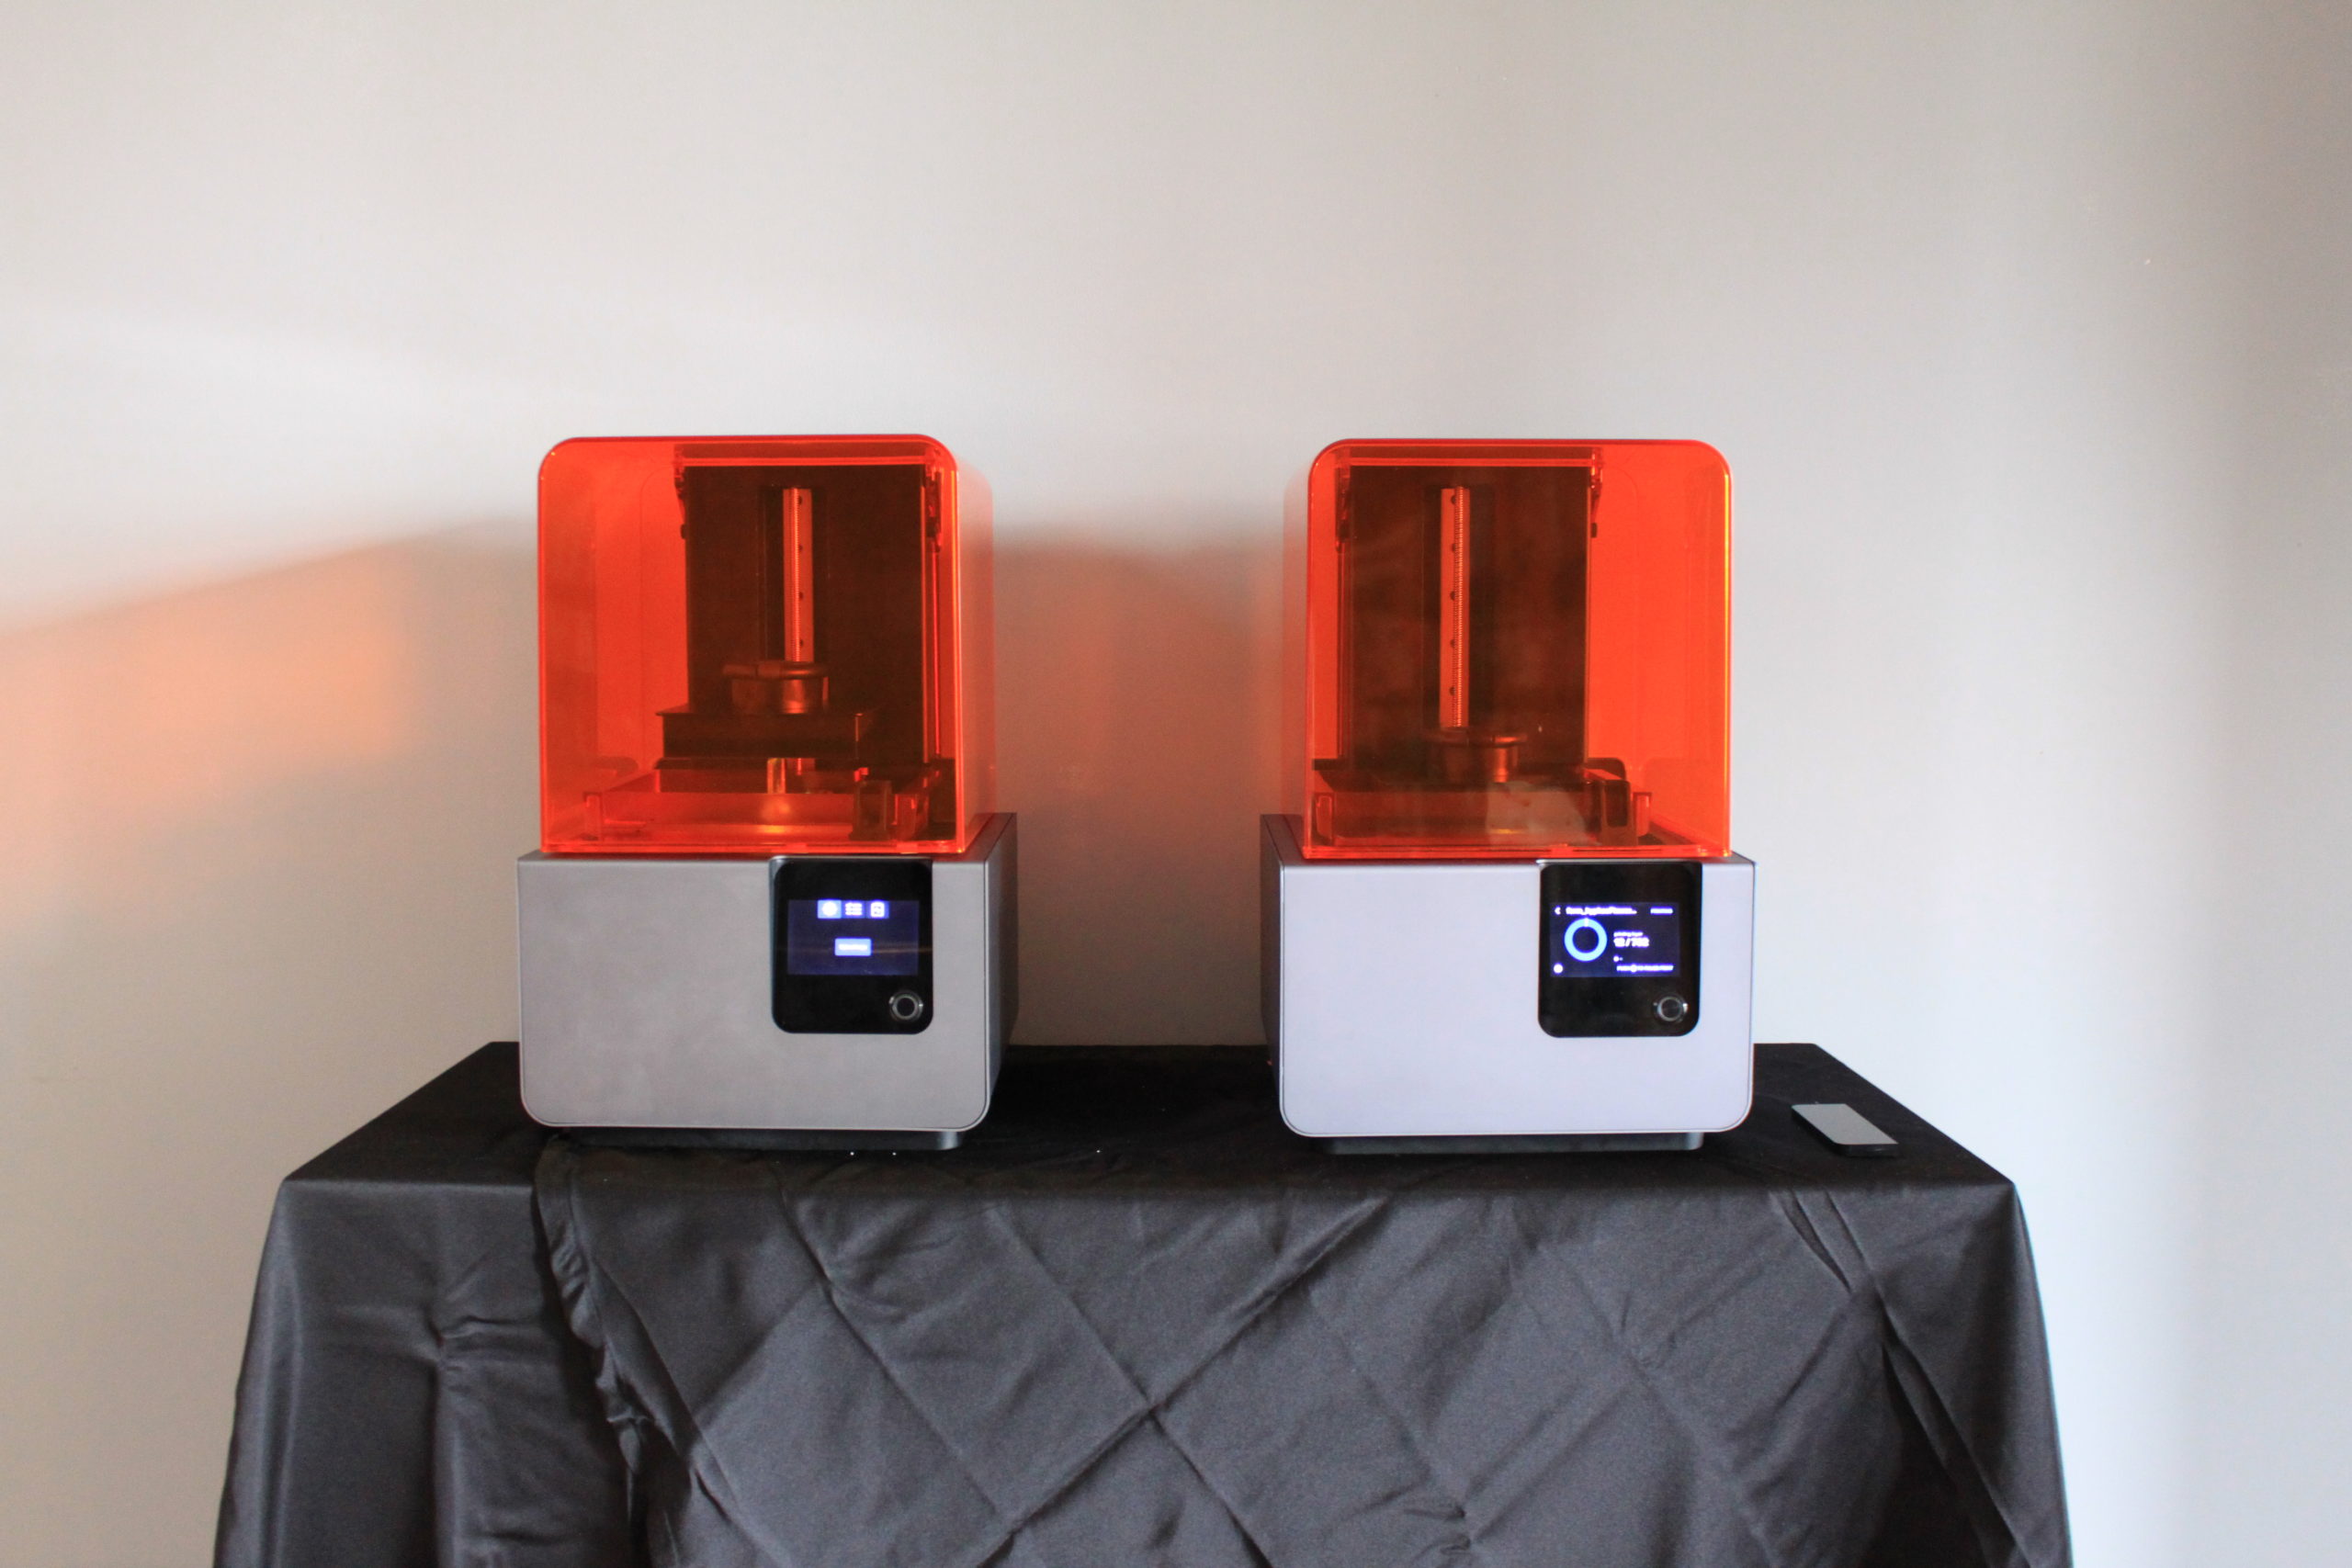 This Popular And Super Futuristic 3D Printer Is Now Also Easy To Use